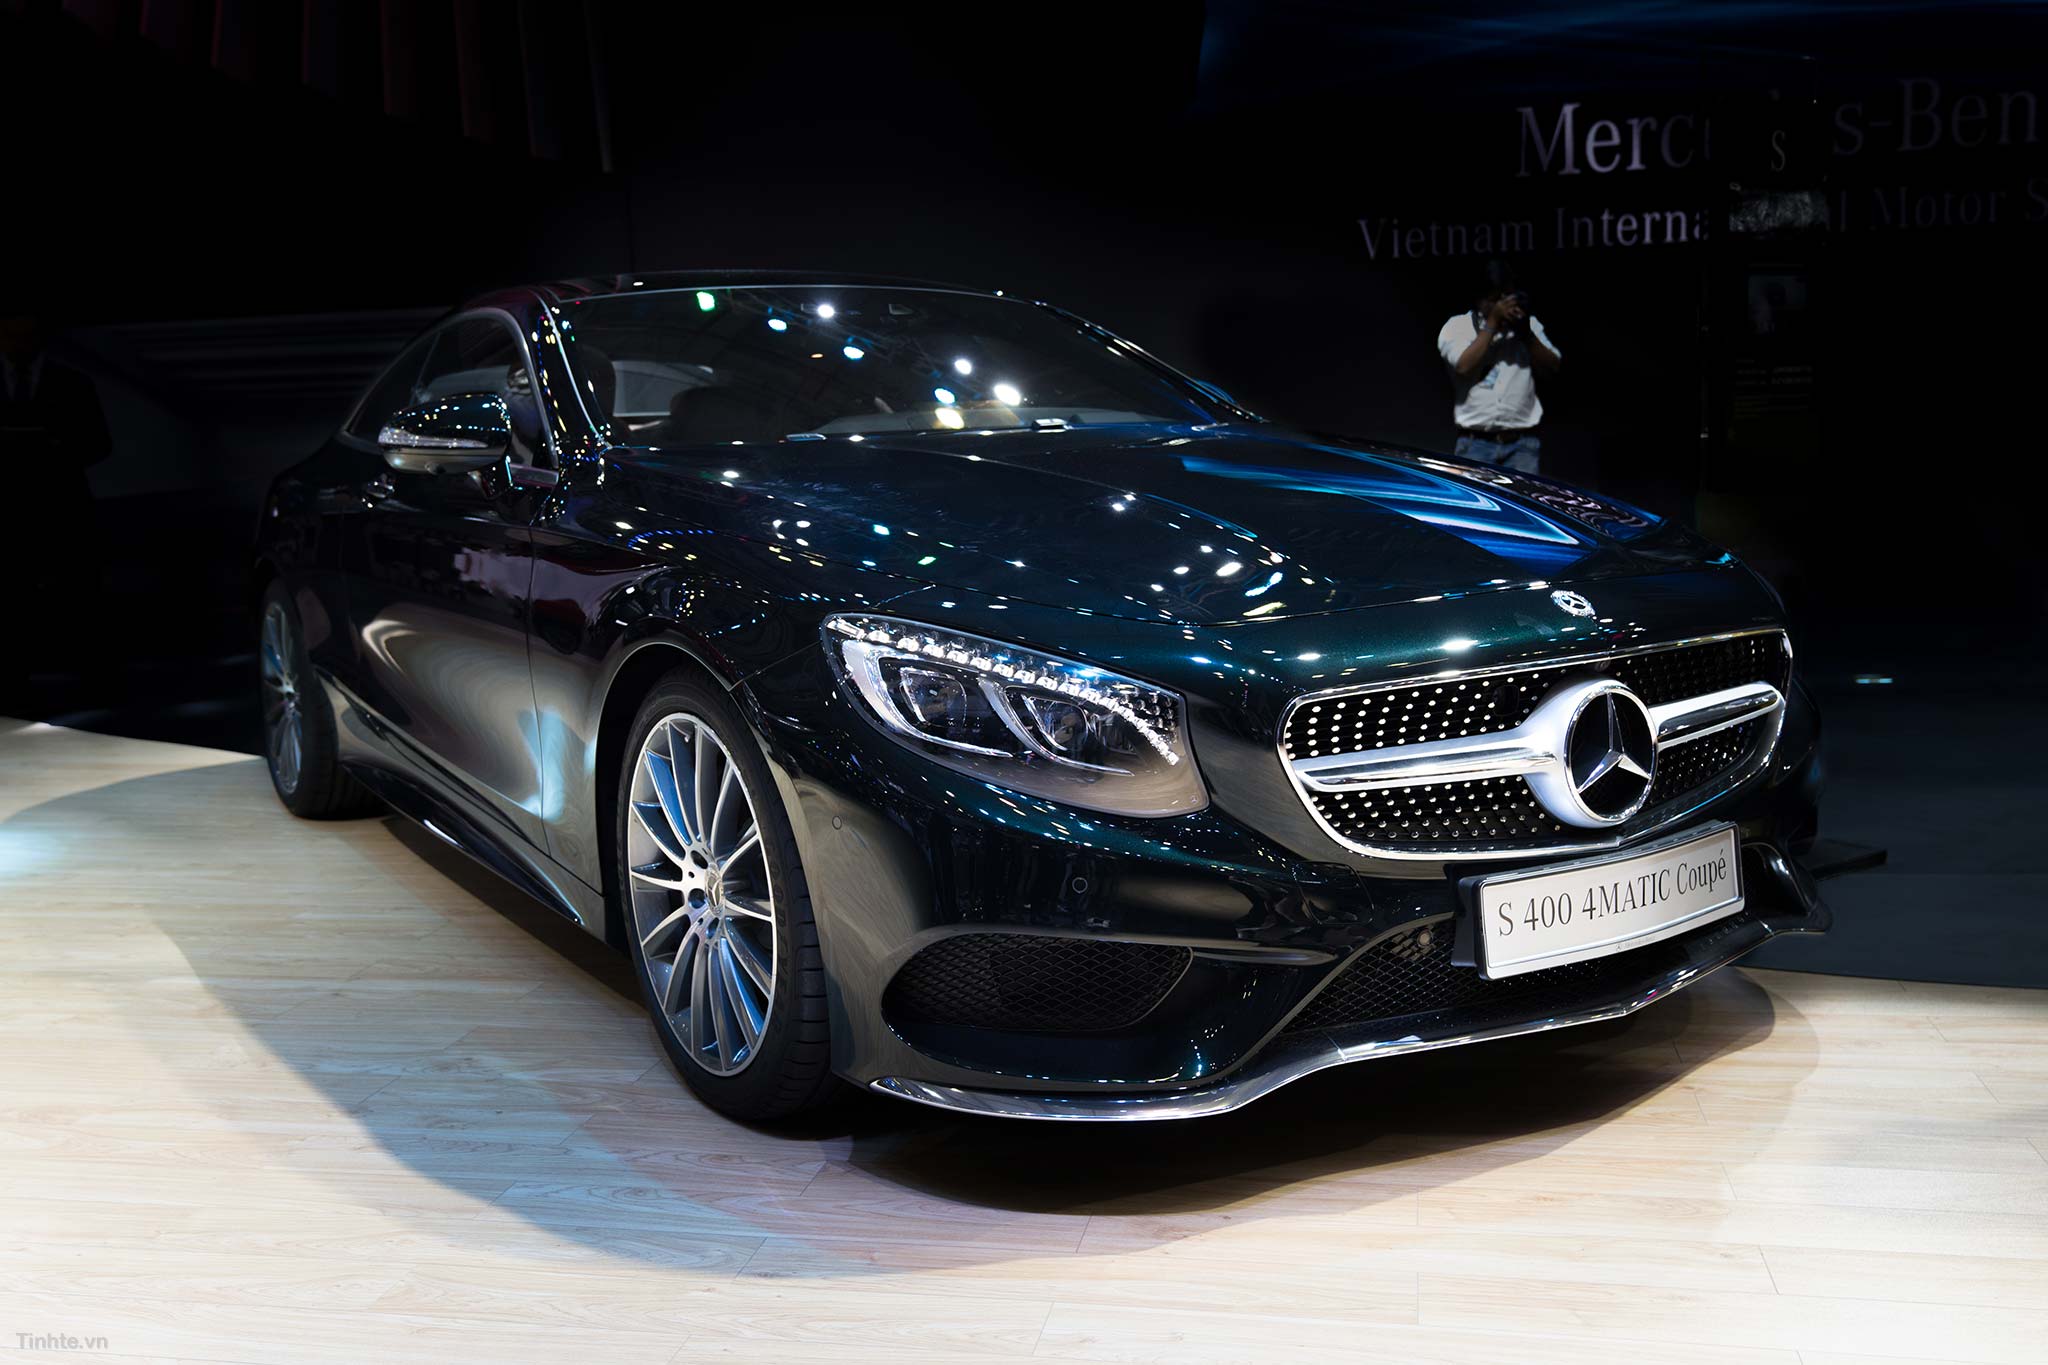 tinhte_mecmercedes_benz_s400_coupe_15.jpg